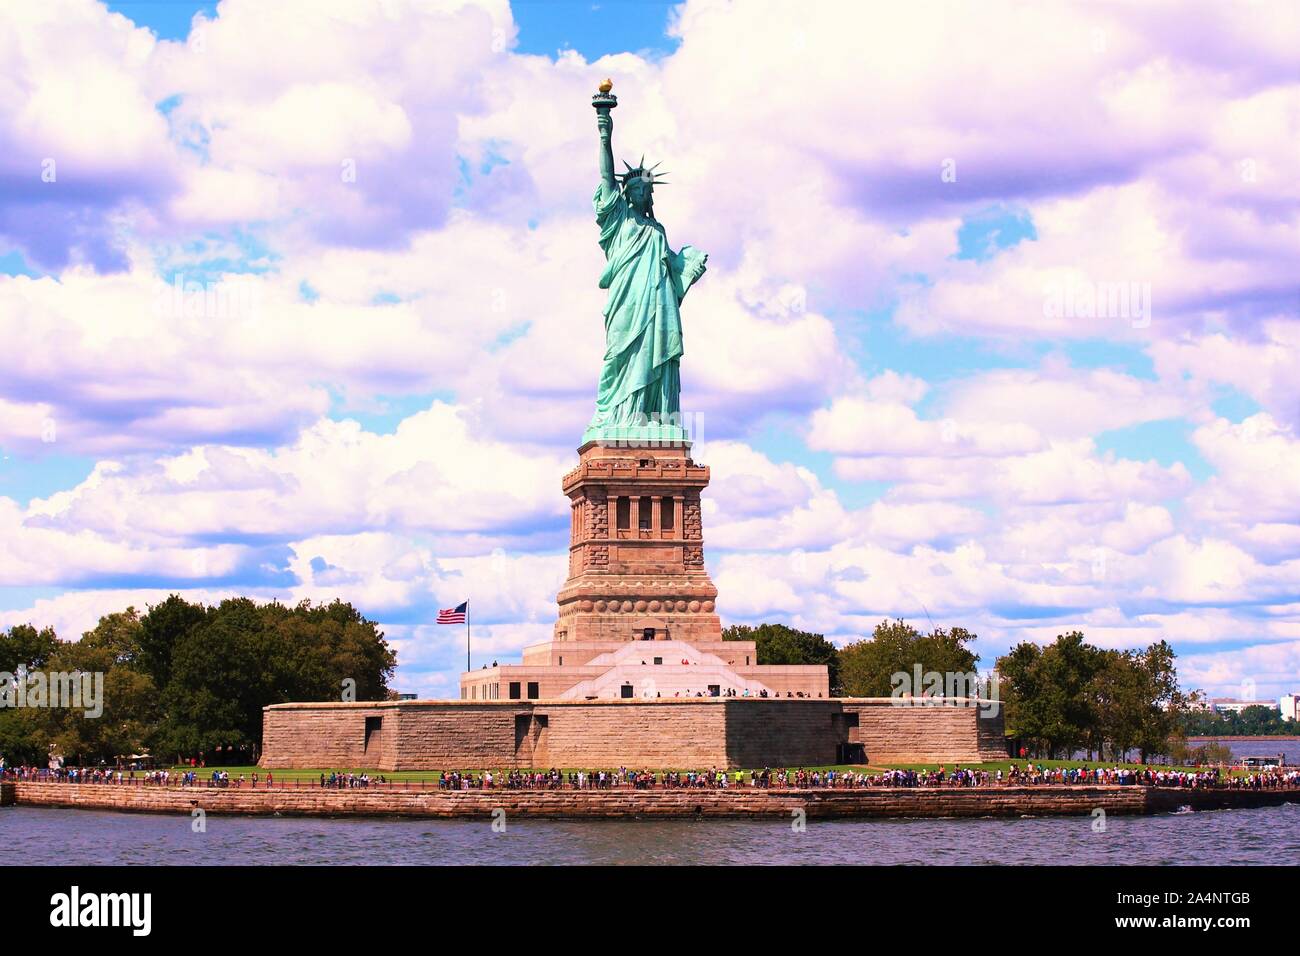 The Statue of Liberty on Liberty Island in New York Harbour. Stock Photo